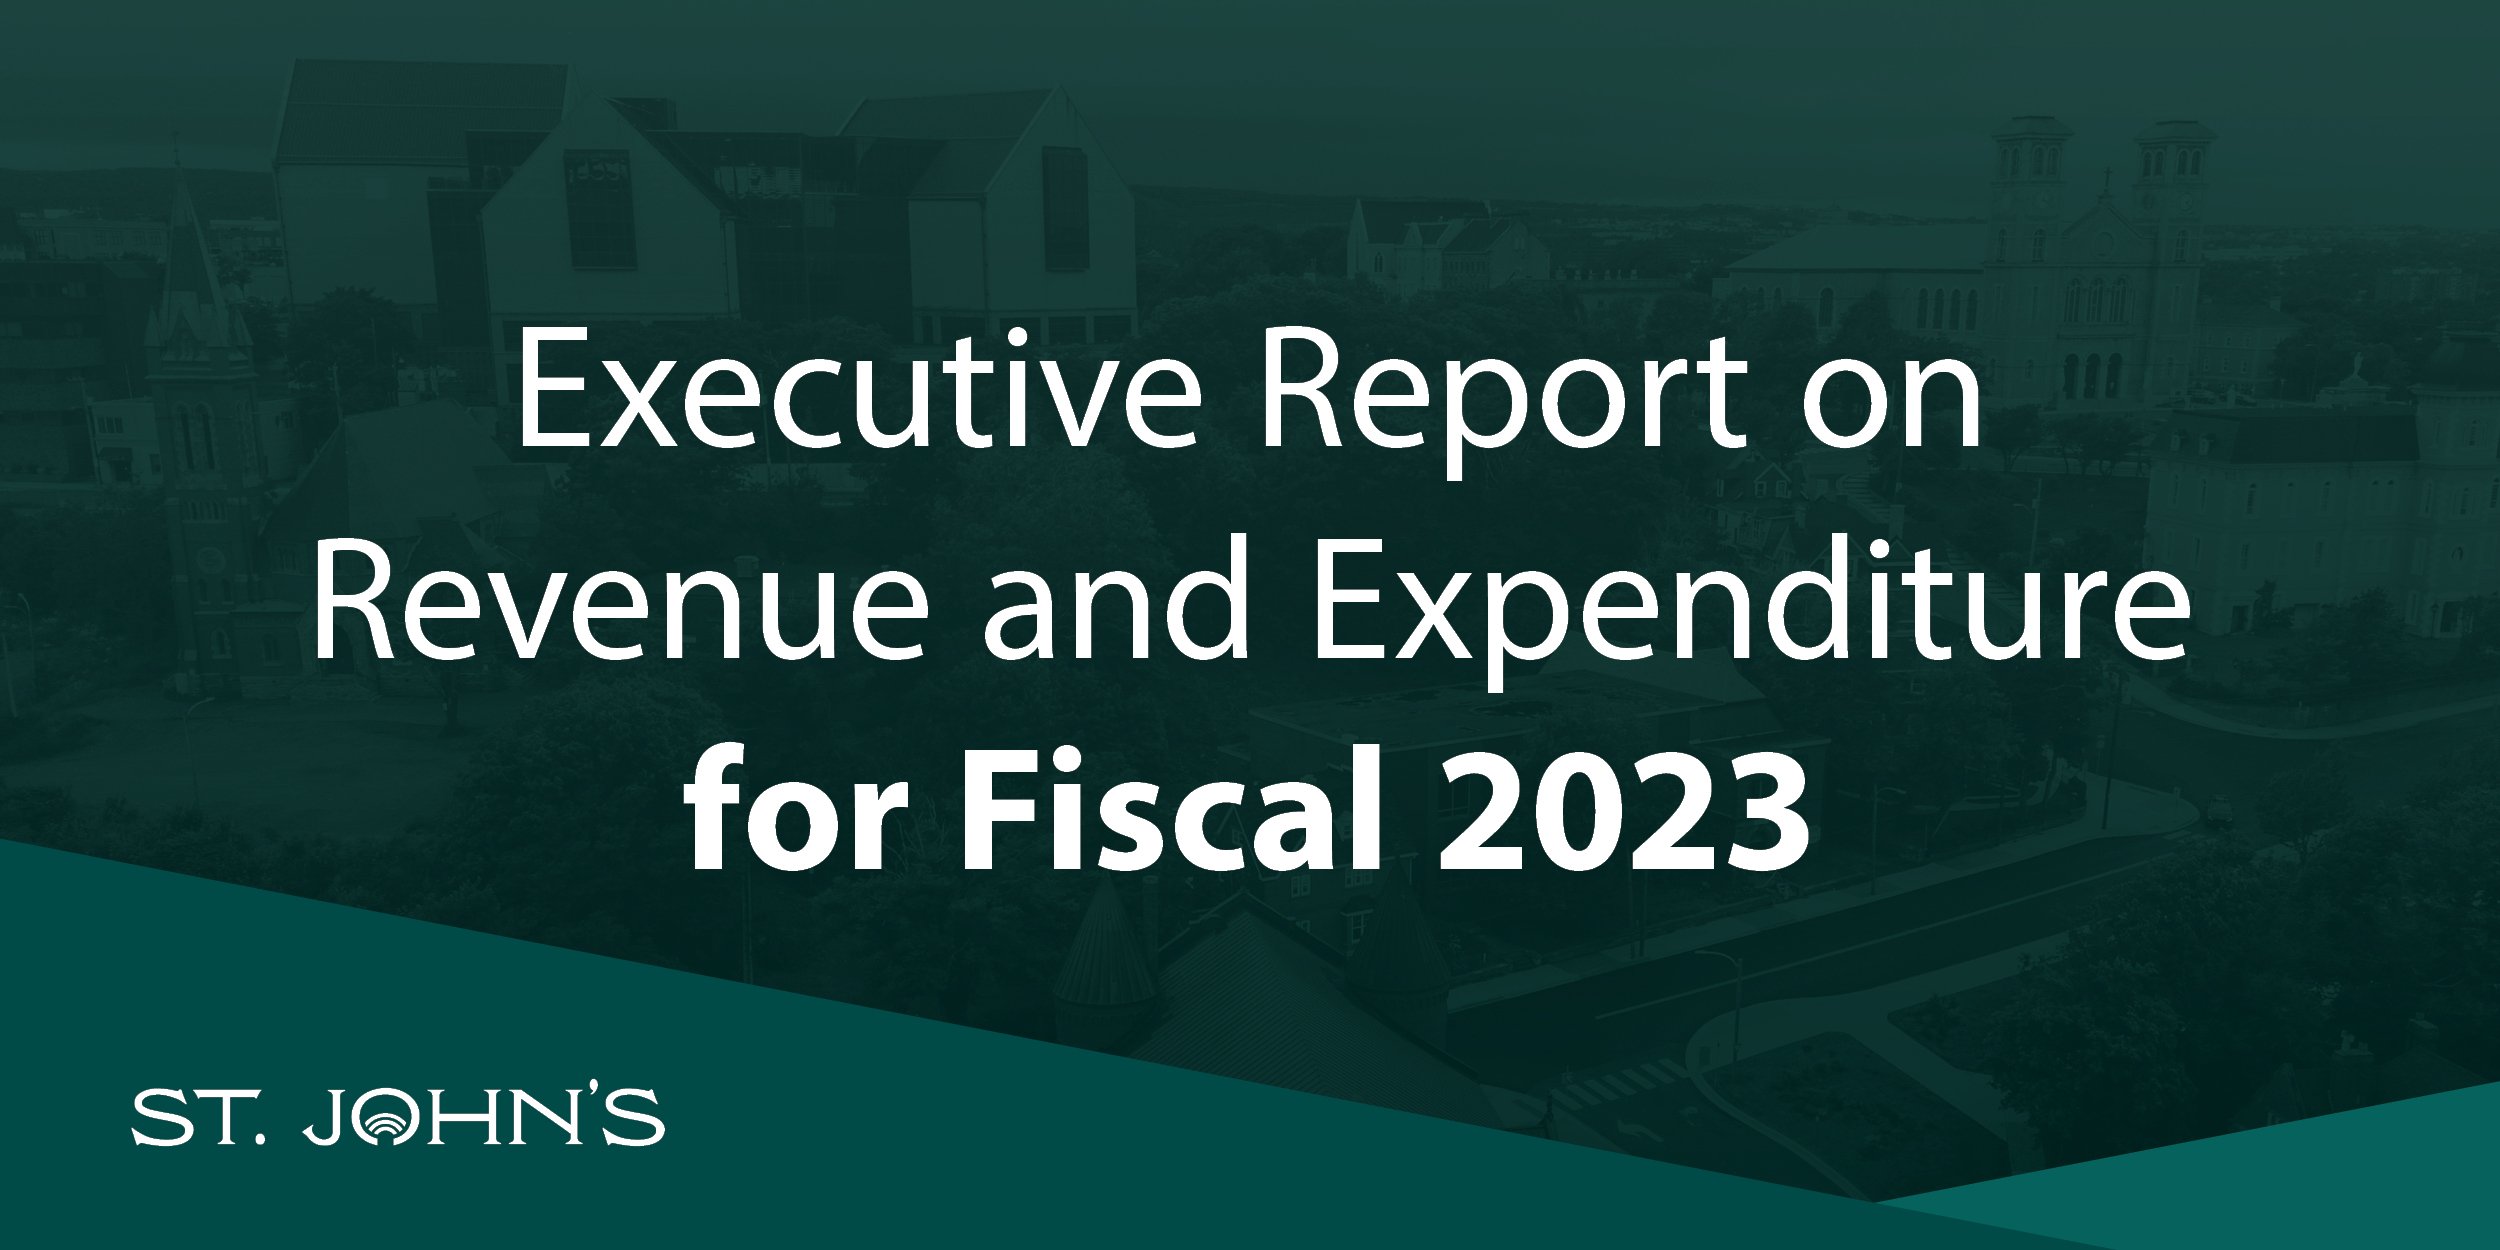 Dark green background with white text "Executive Report on Revenue and Expenditure for Fiscal 2023" with City logo